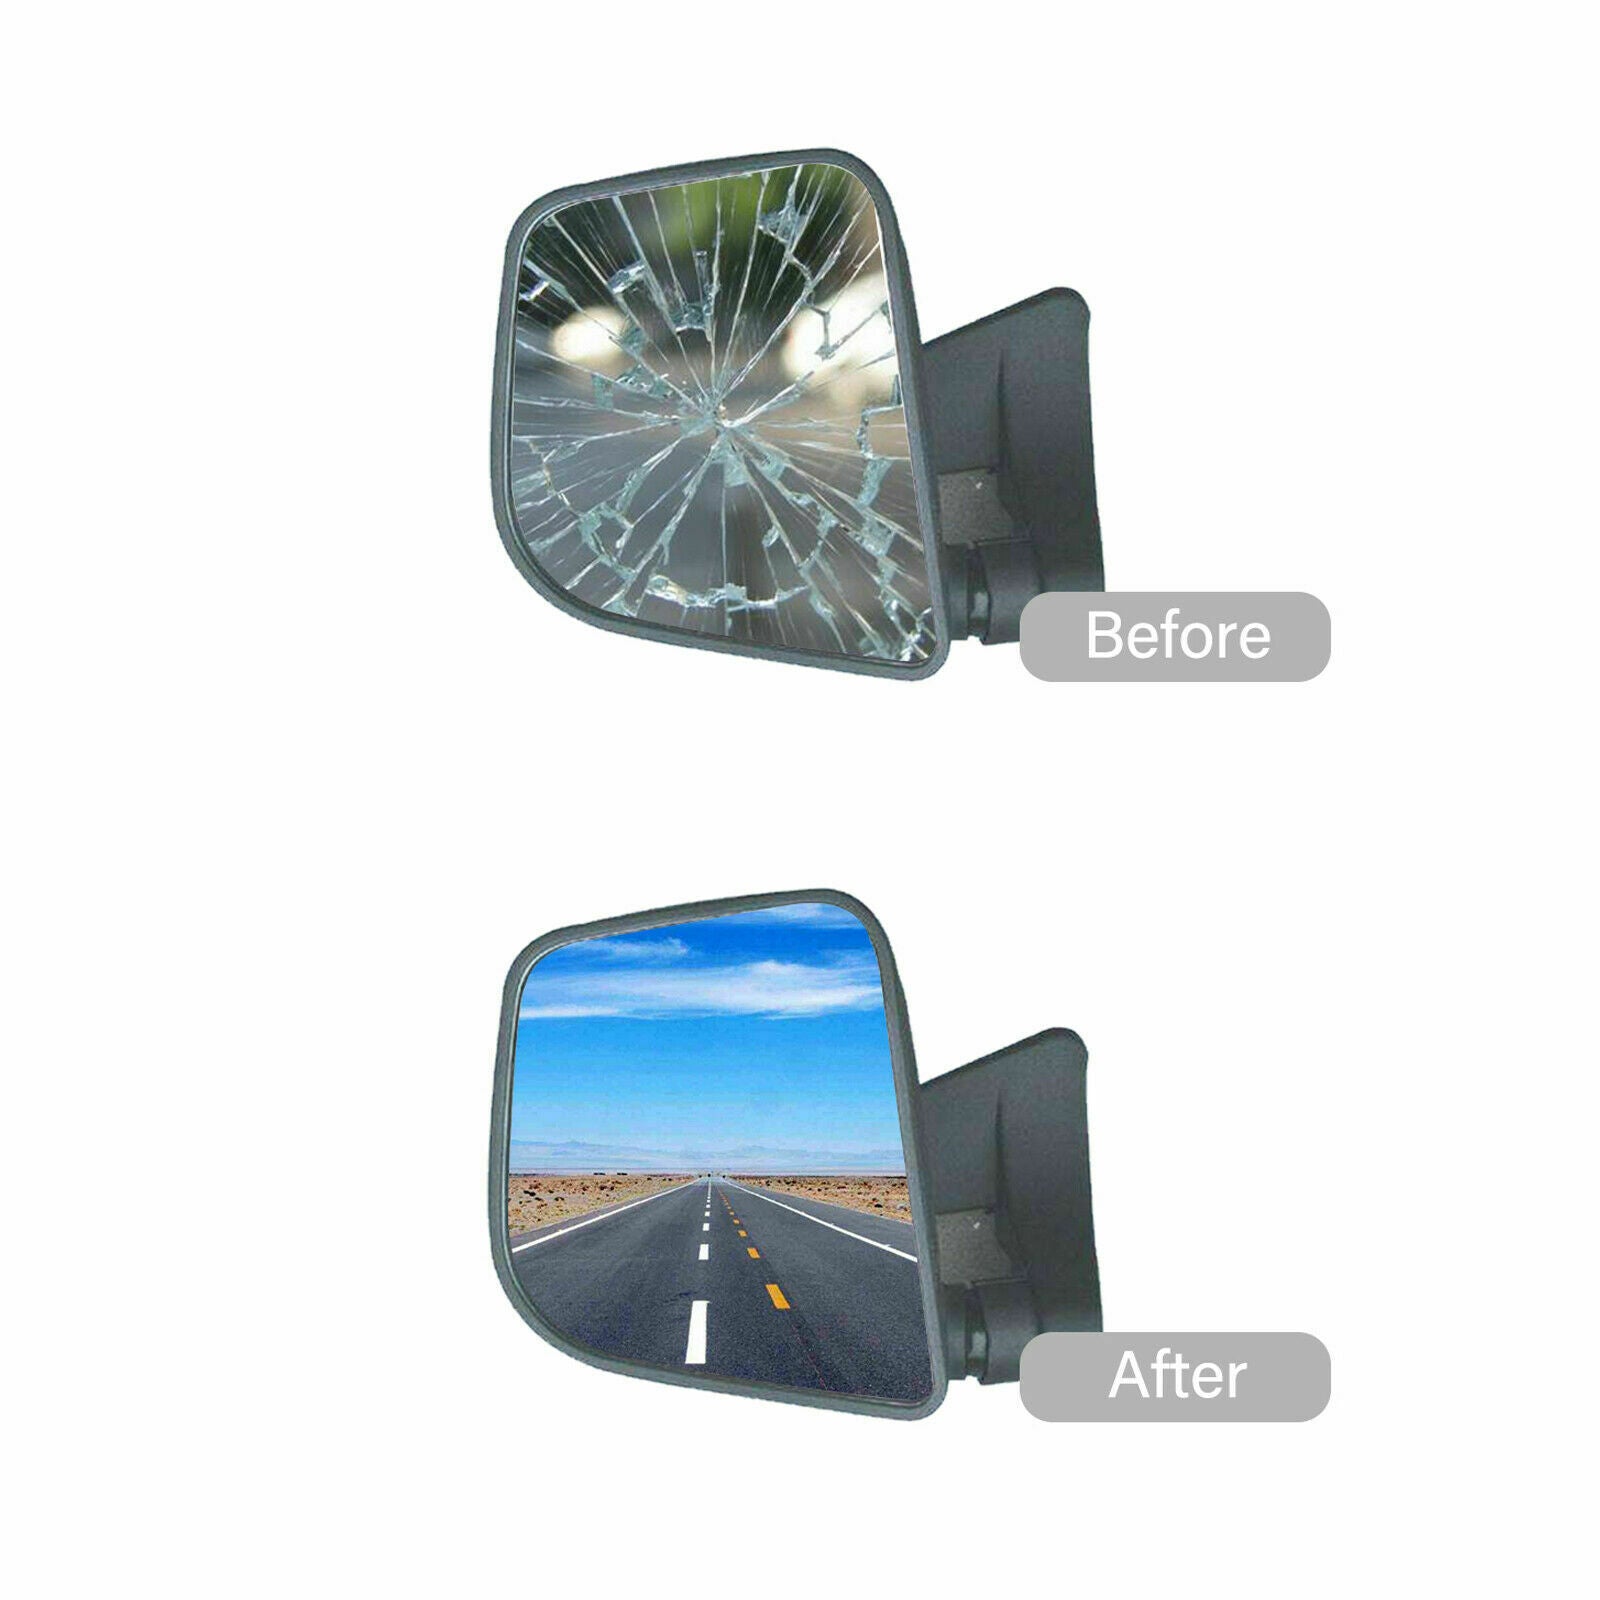 WLLW a Pair of Towing Replacement Mirror Glass  for 2004-2019 Nissan Titan/2016-2021 Nissan Titan XD, Driver Left Side LH/Passenger Right Side RH/The Both Sides Upper&Lower Flat Convex D-0040